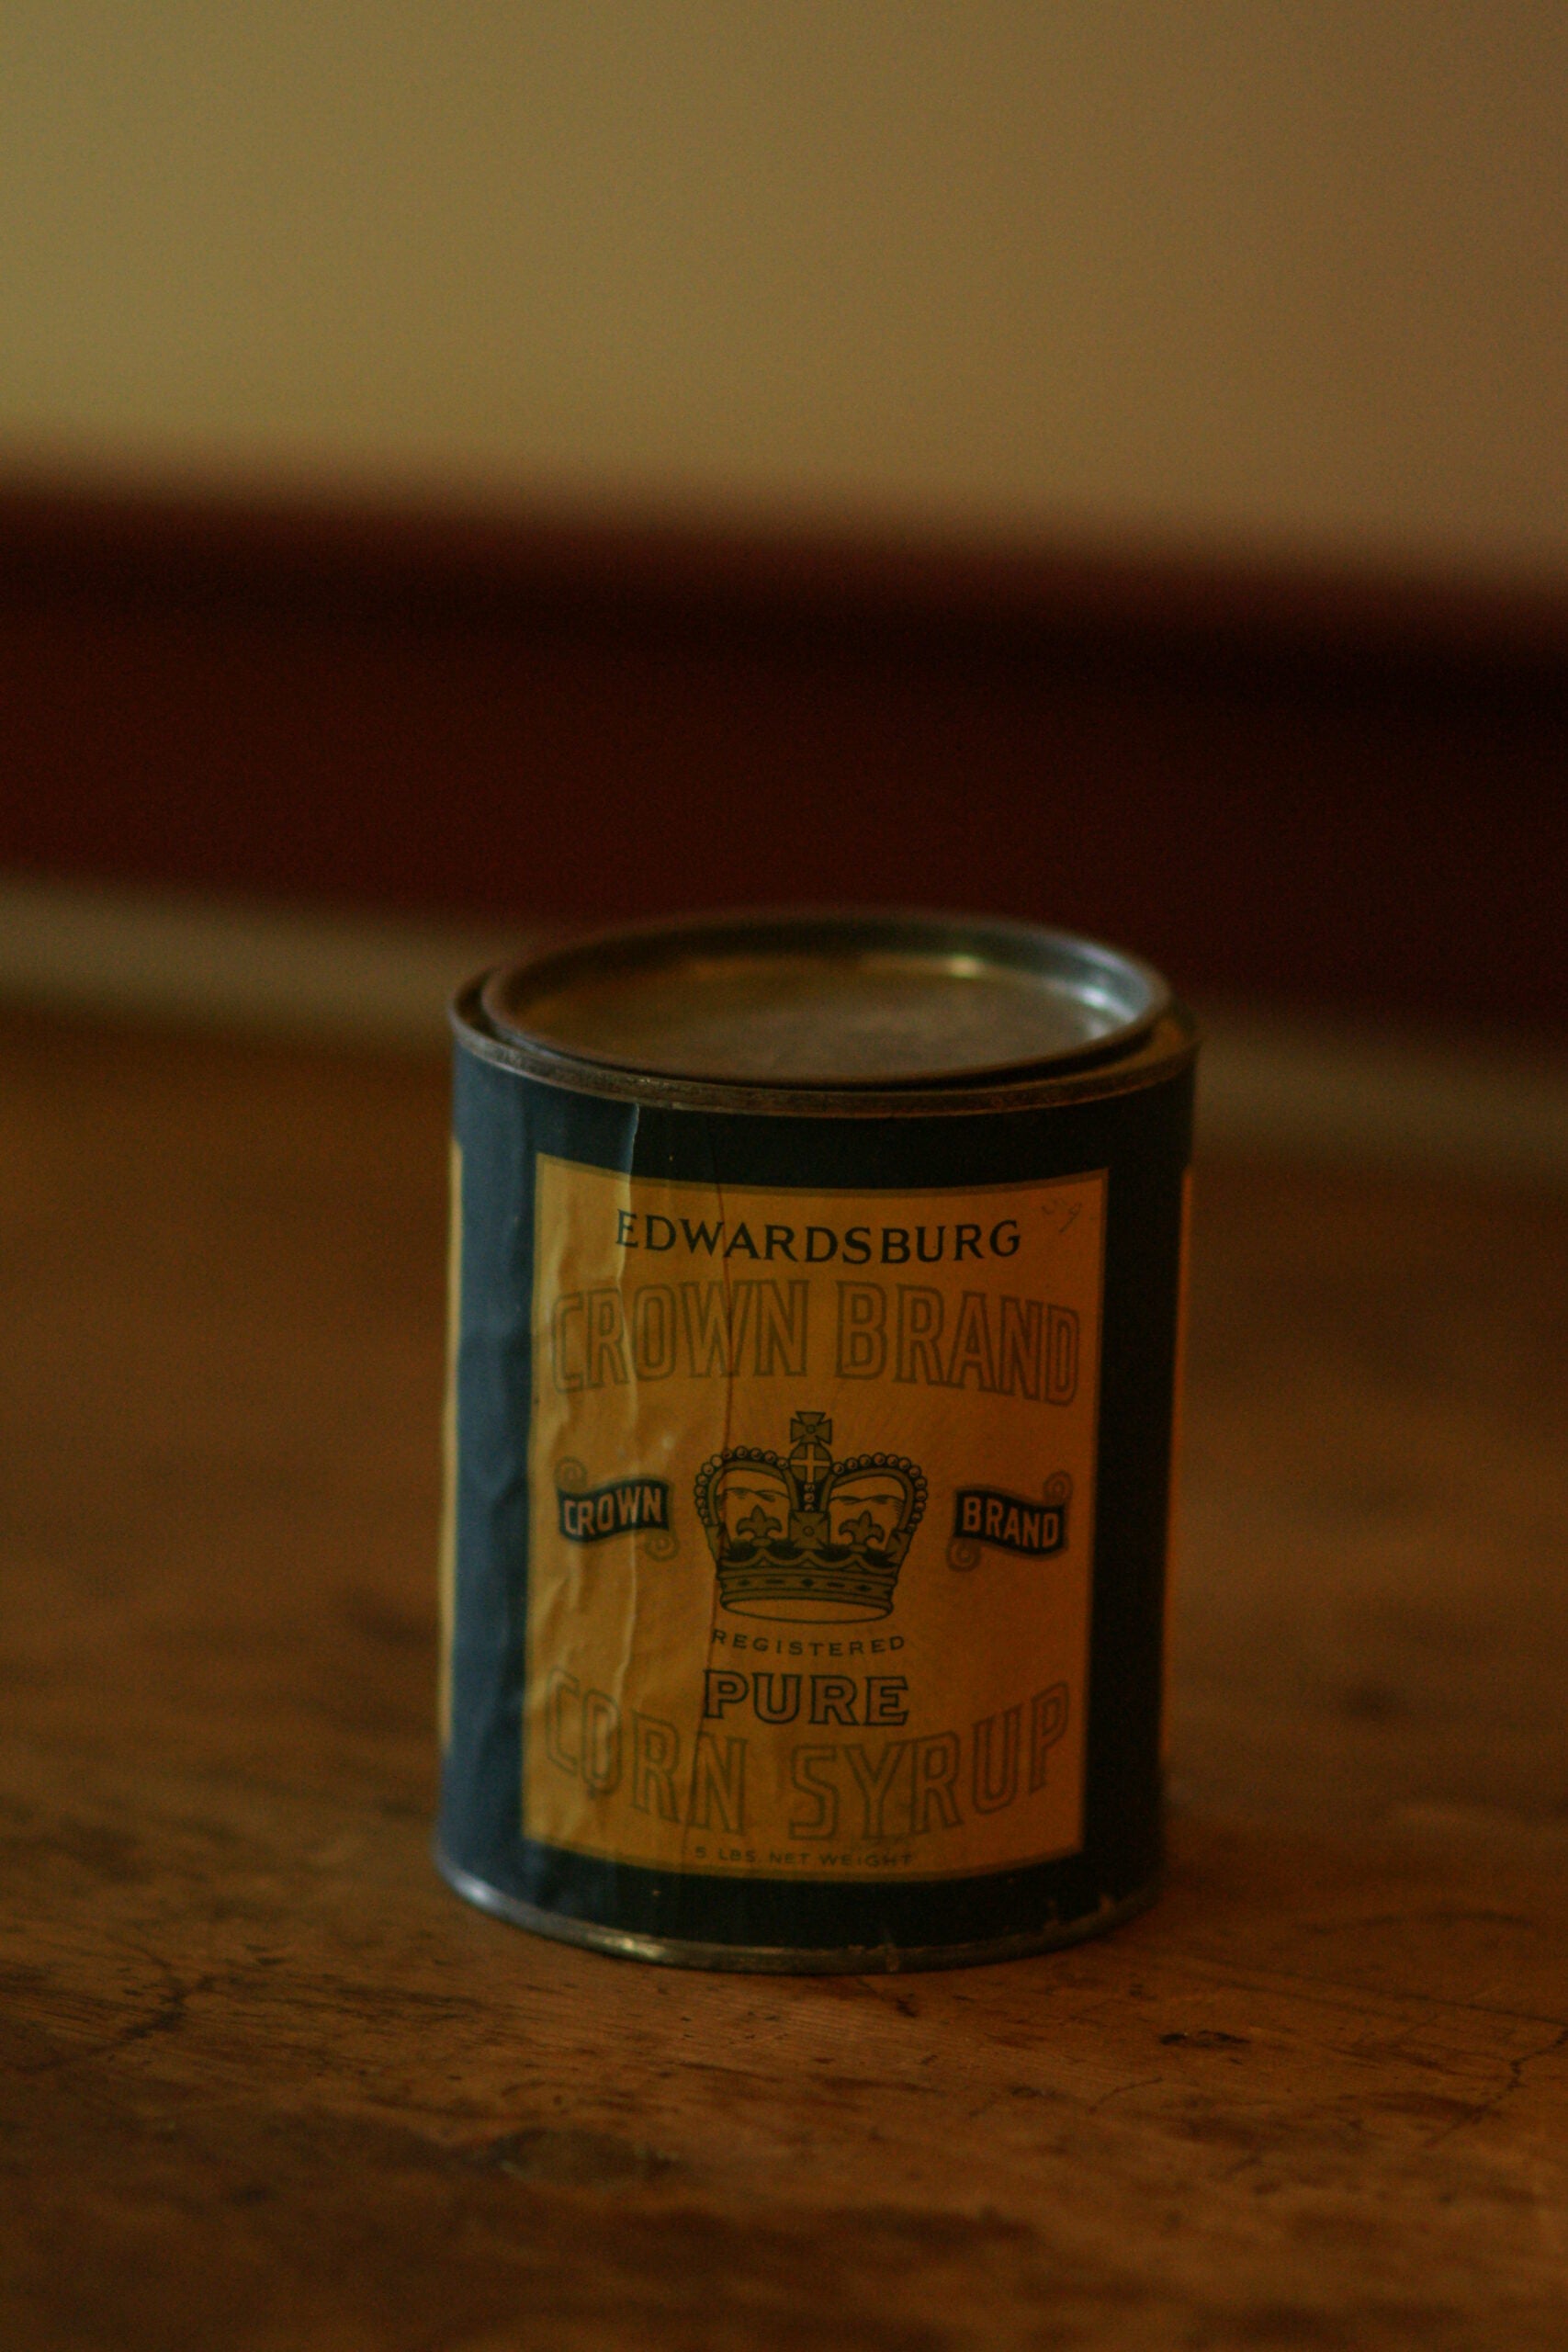 A can with clear signs of age, labled "edwardsburg Crown Brand Corn Syrup" on a yellow and blue label